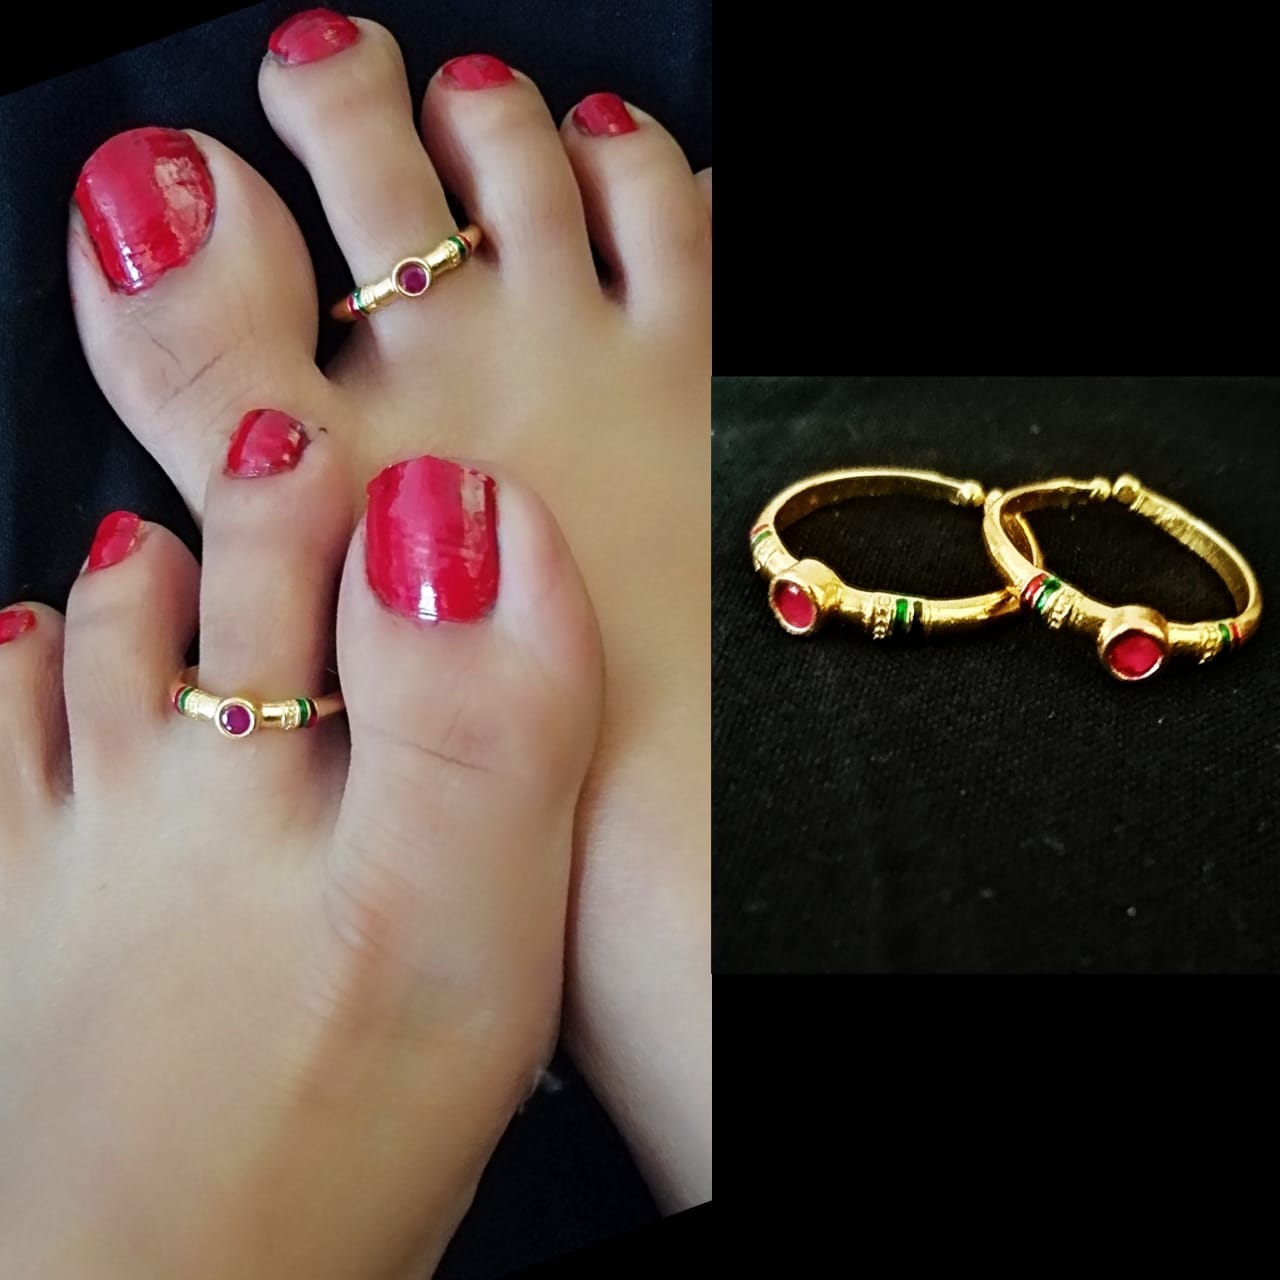 Adjustable Toe Finger Ring For Women Set For Women And Girls Simple Beach  Open Toes With Cute Arrow, Heart, And Feather Designs Perfect Summer Foot  Jewelry From Us_georgia, $7.02 | DHgate.Com